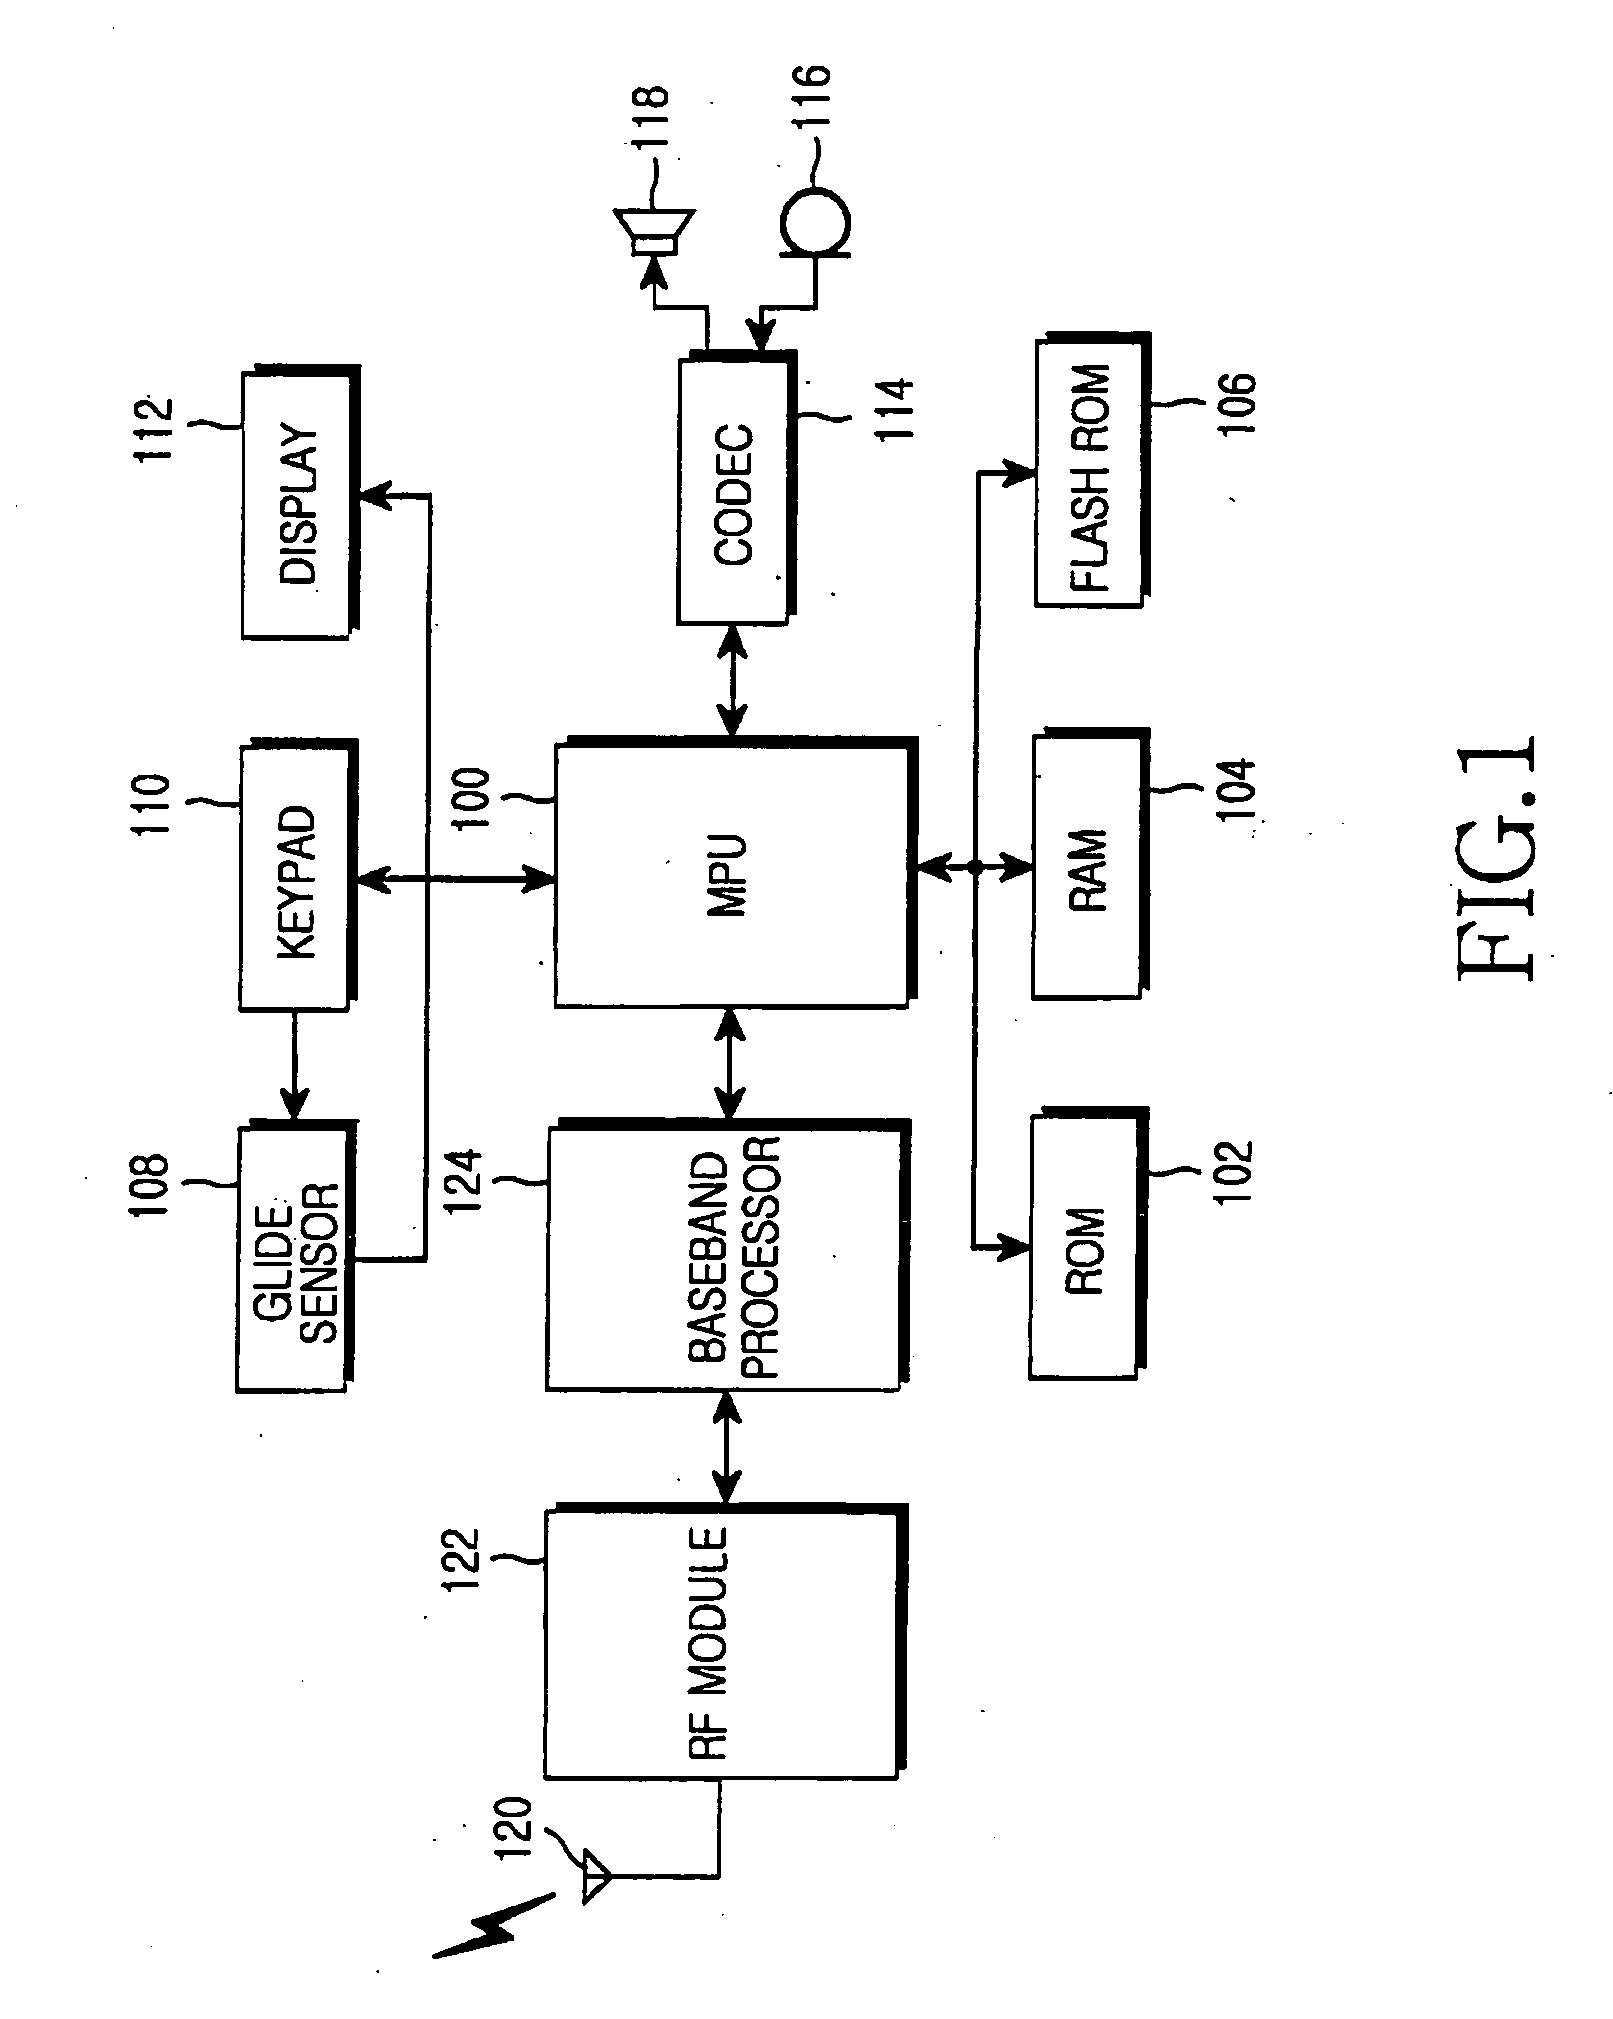 Apparatus and method for recognizing and transmitting handwritten data in a mobile communication terminal